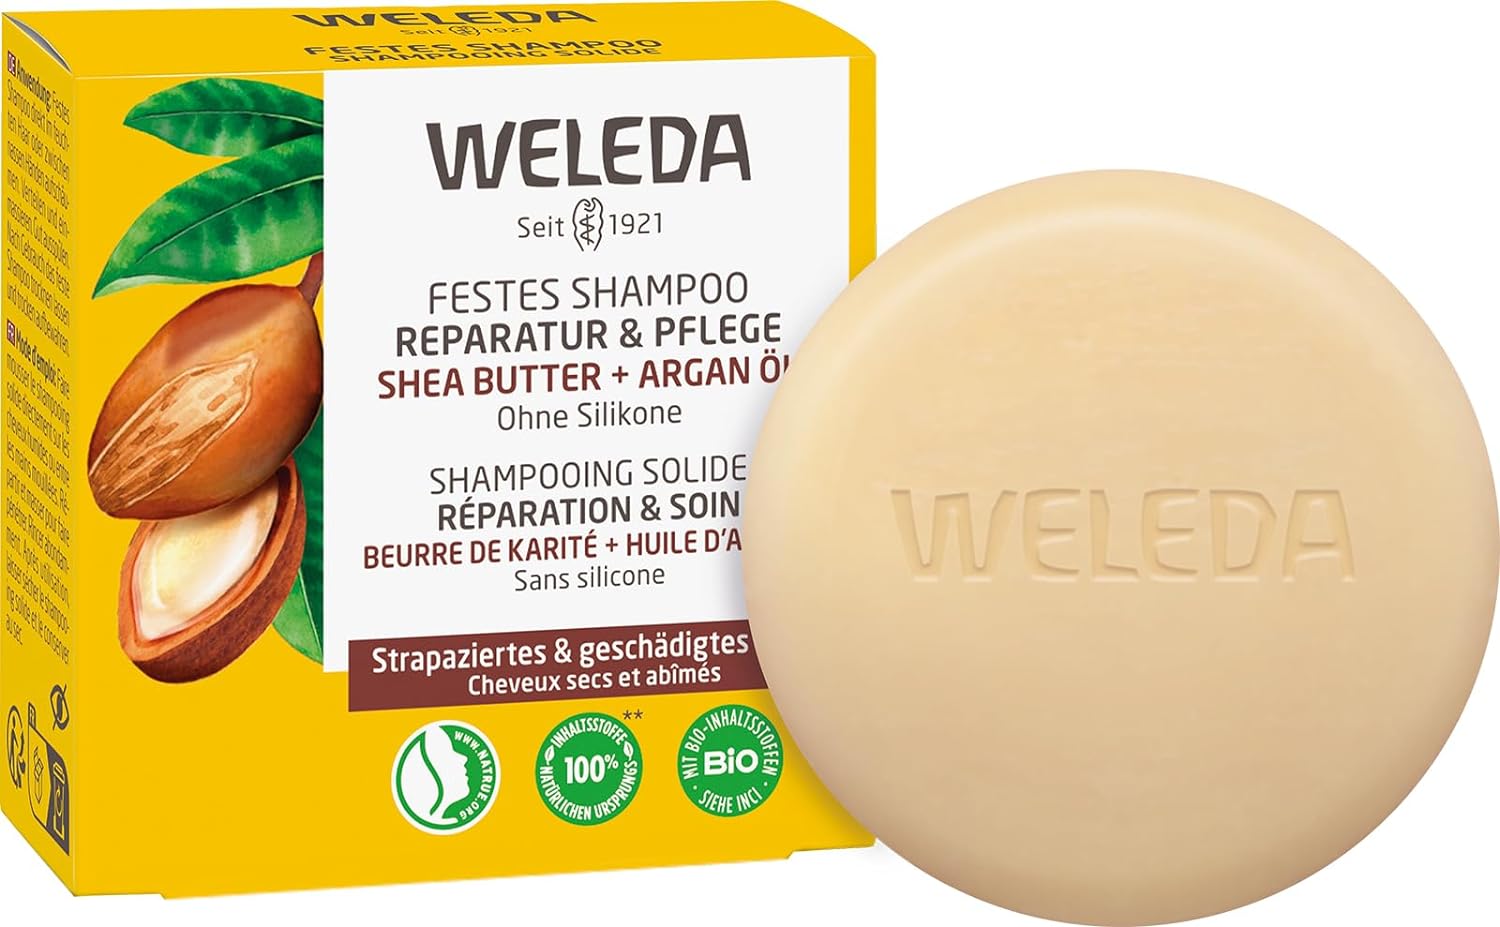 Weleda Organic Solid Shampoo Repair & Care - Natural Cosmetics Hair Care Soap Protects Against Split Ends & Hair Breakage with Organic Shea Butter, Argan Oil & Keratin. Natural Hair Shampoo Without